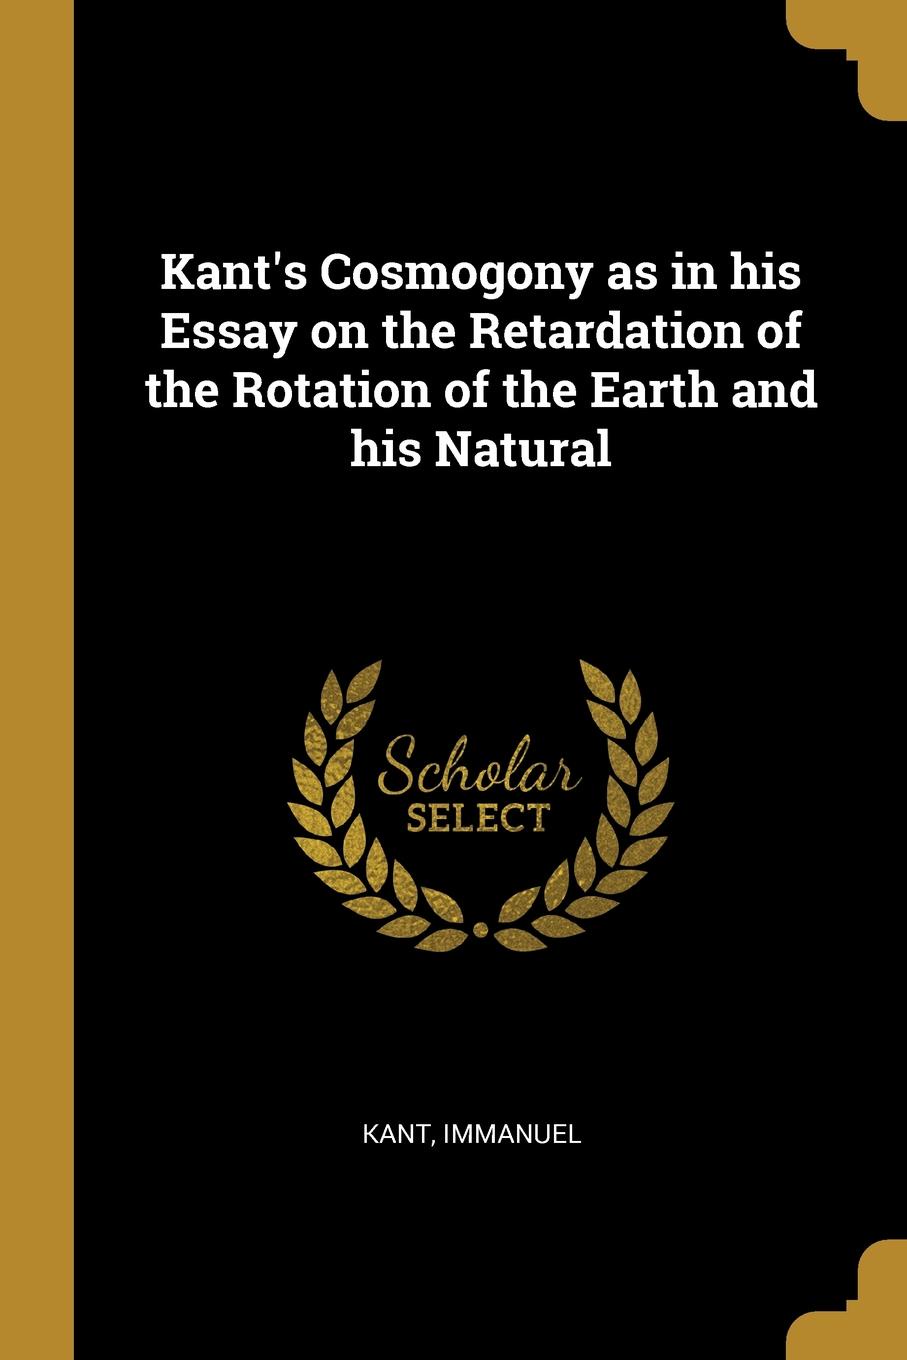 Kant.s Cosmogony as in his Essay on the Retardation of the Rotation of the Earth and his Natural